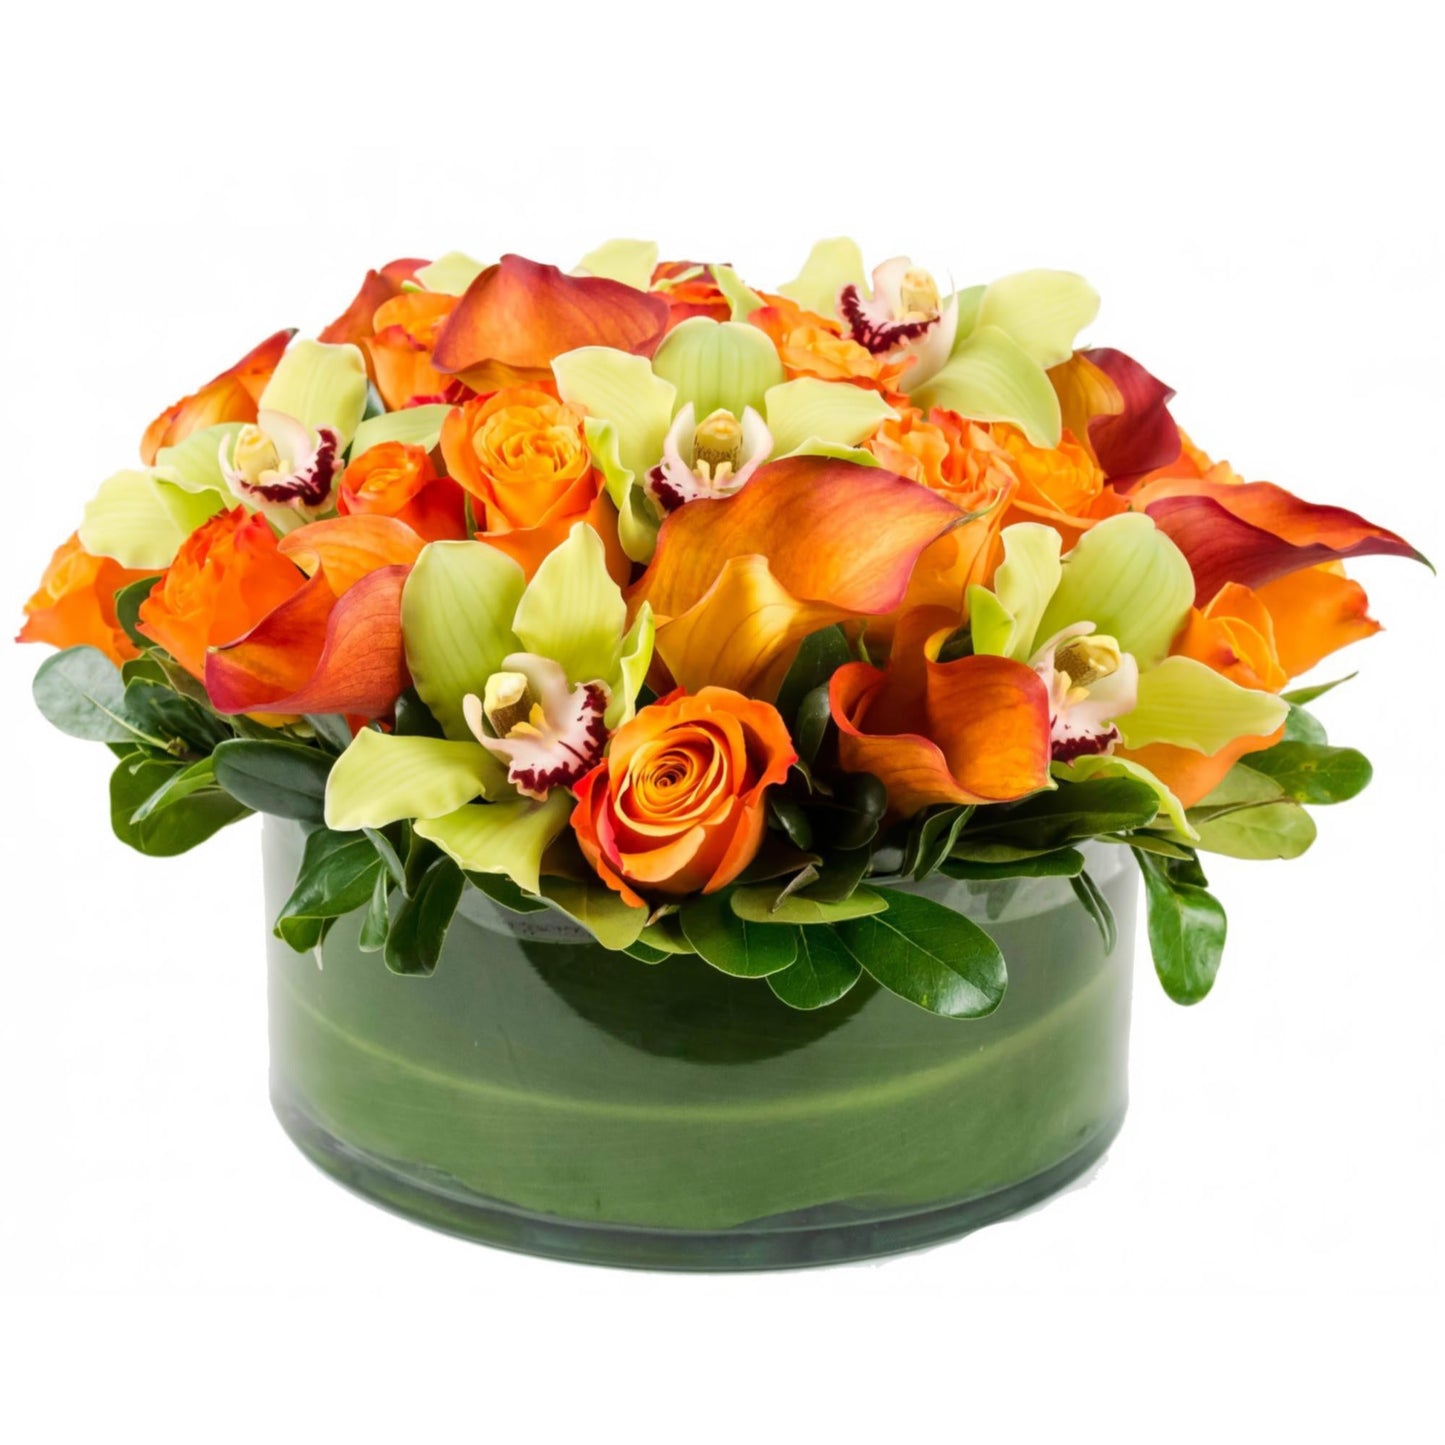 Orange You Special Floral Arrangement by Queens Flower Delivery features orange roses and green cymbidium orchids in a cylinder vase.